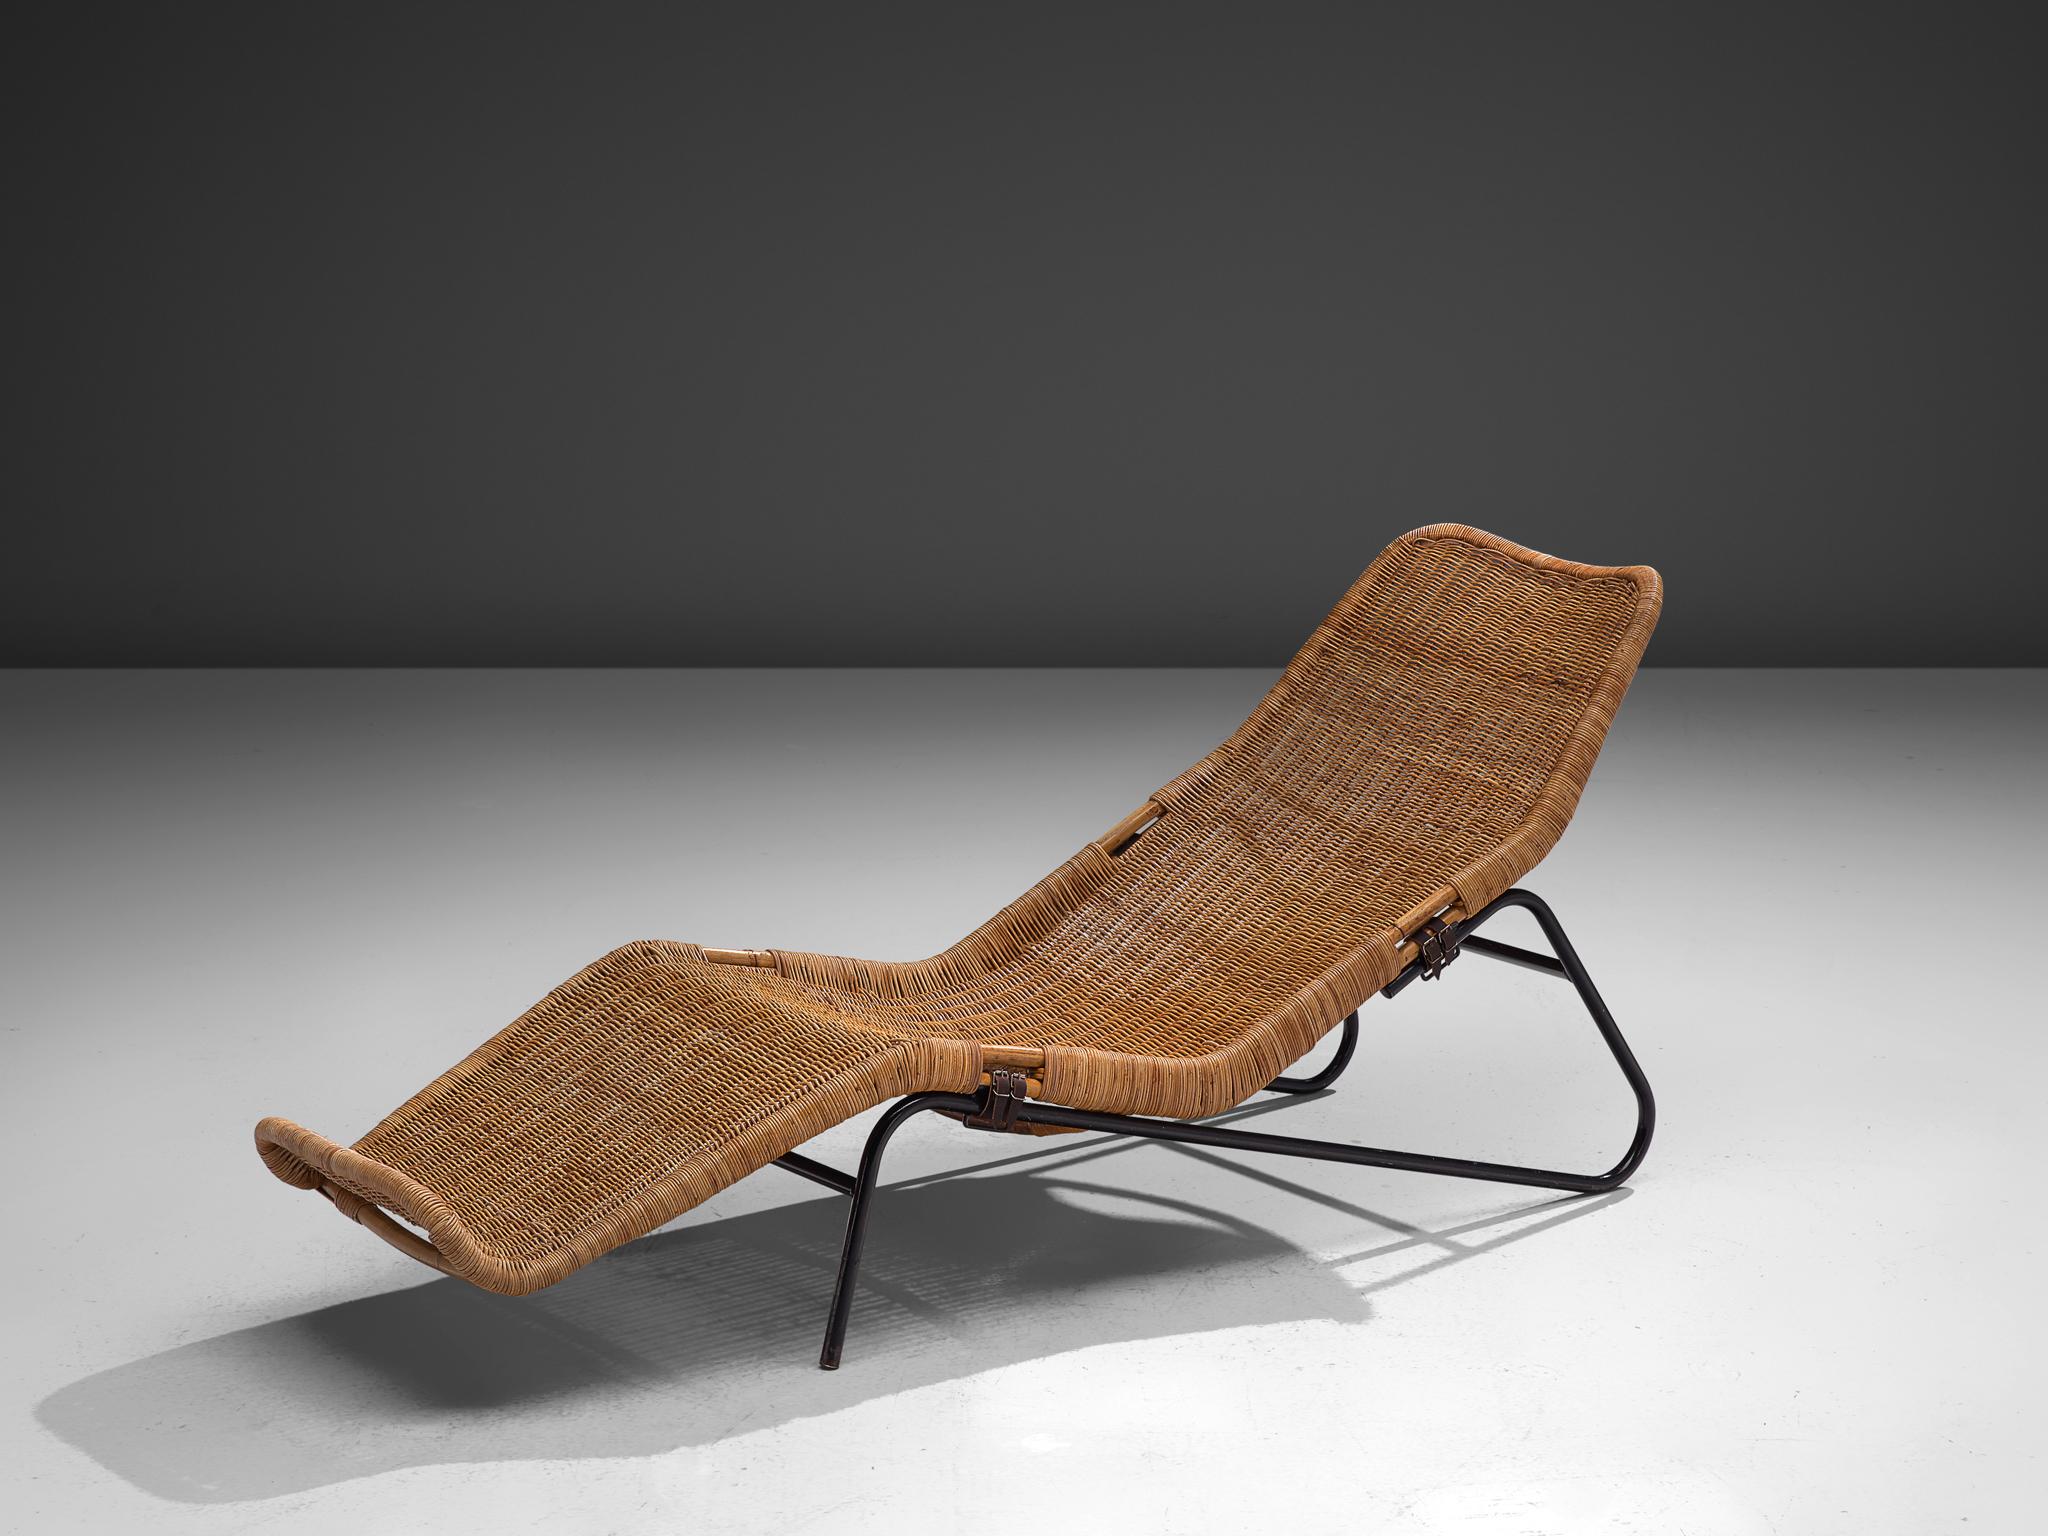 Dirk van Sliedrecht for Jonkers, daybed, wicker, metal, leather, the Netherlands, 1950s

Functionalist chaise longue designed by Dirk van Sliedrecht. The crafted rattan seat with an organic shape, following the curves of the human body. The